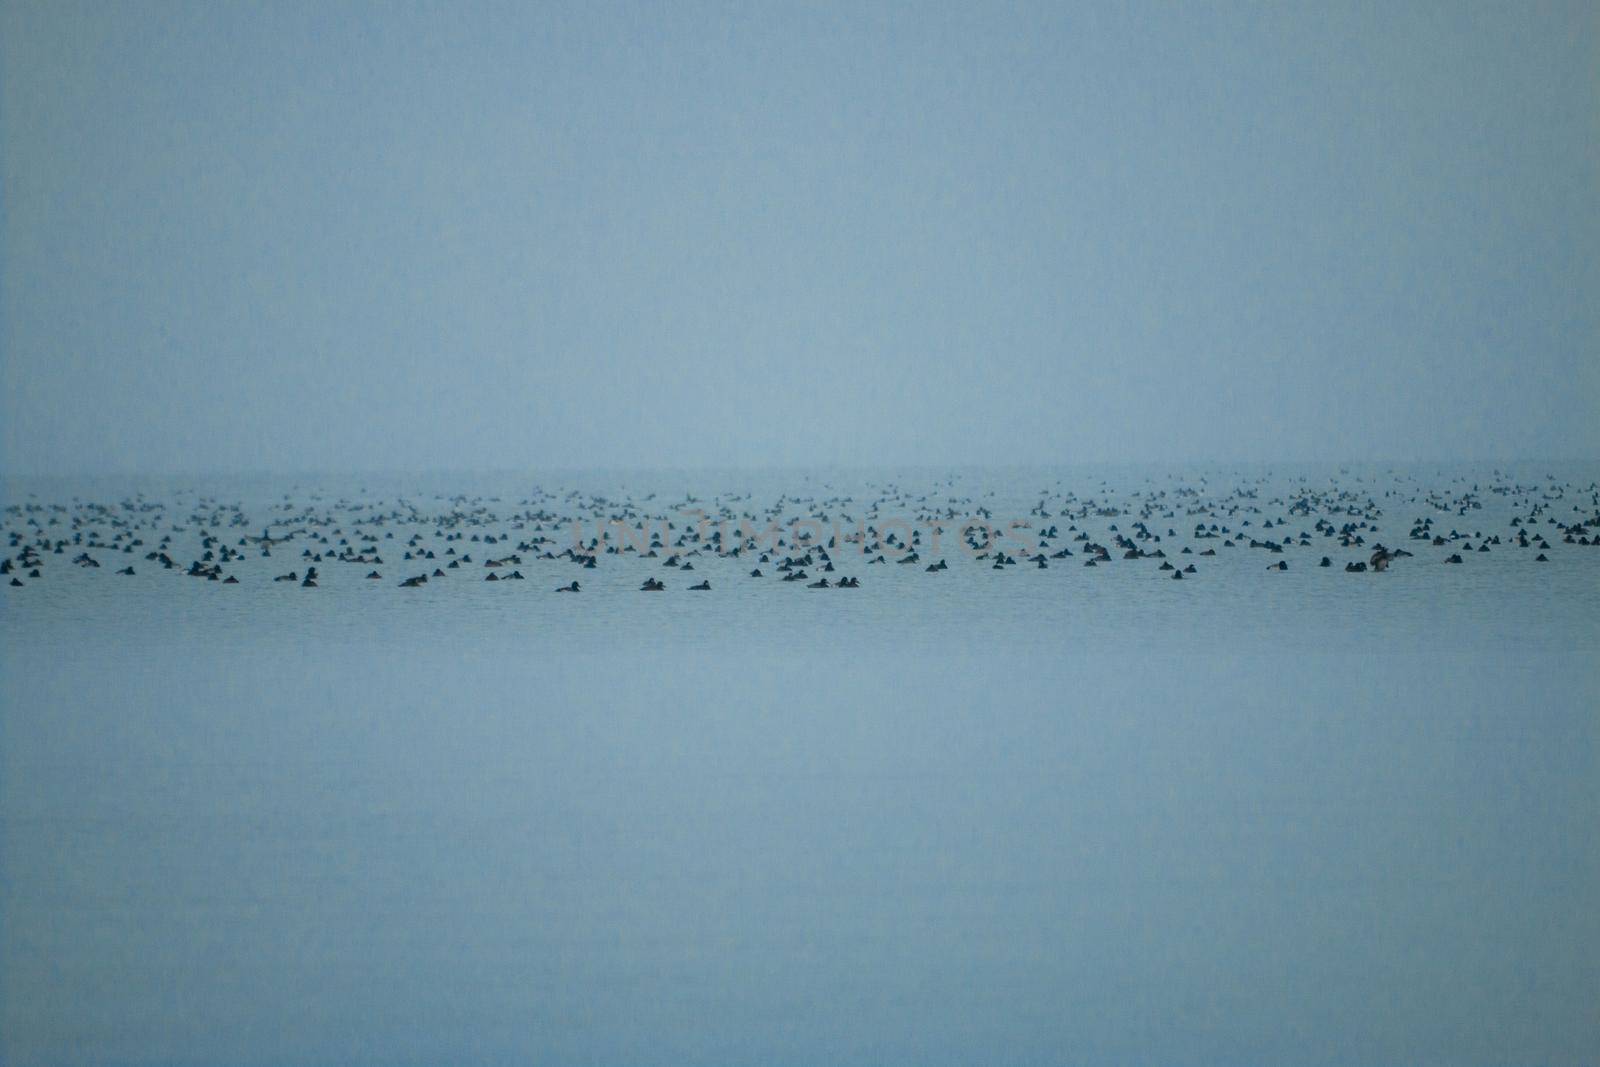 Tons of water birds out at shore in a beautiful misty photo  by mynewturtle1